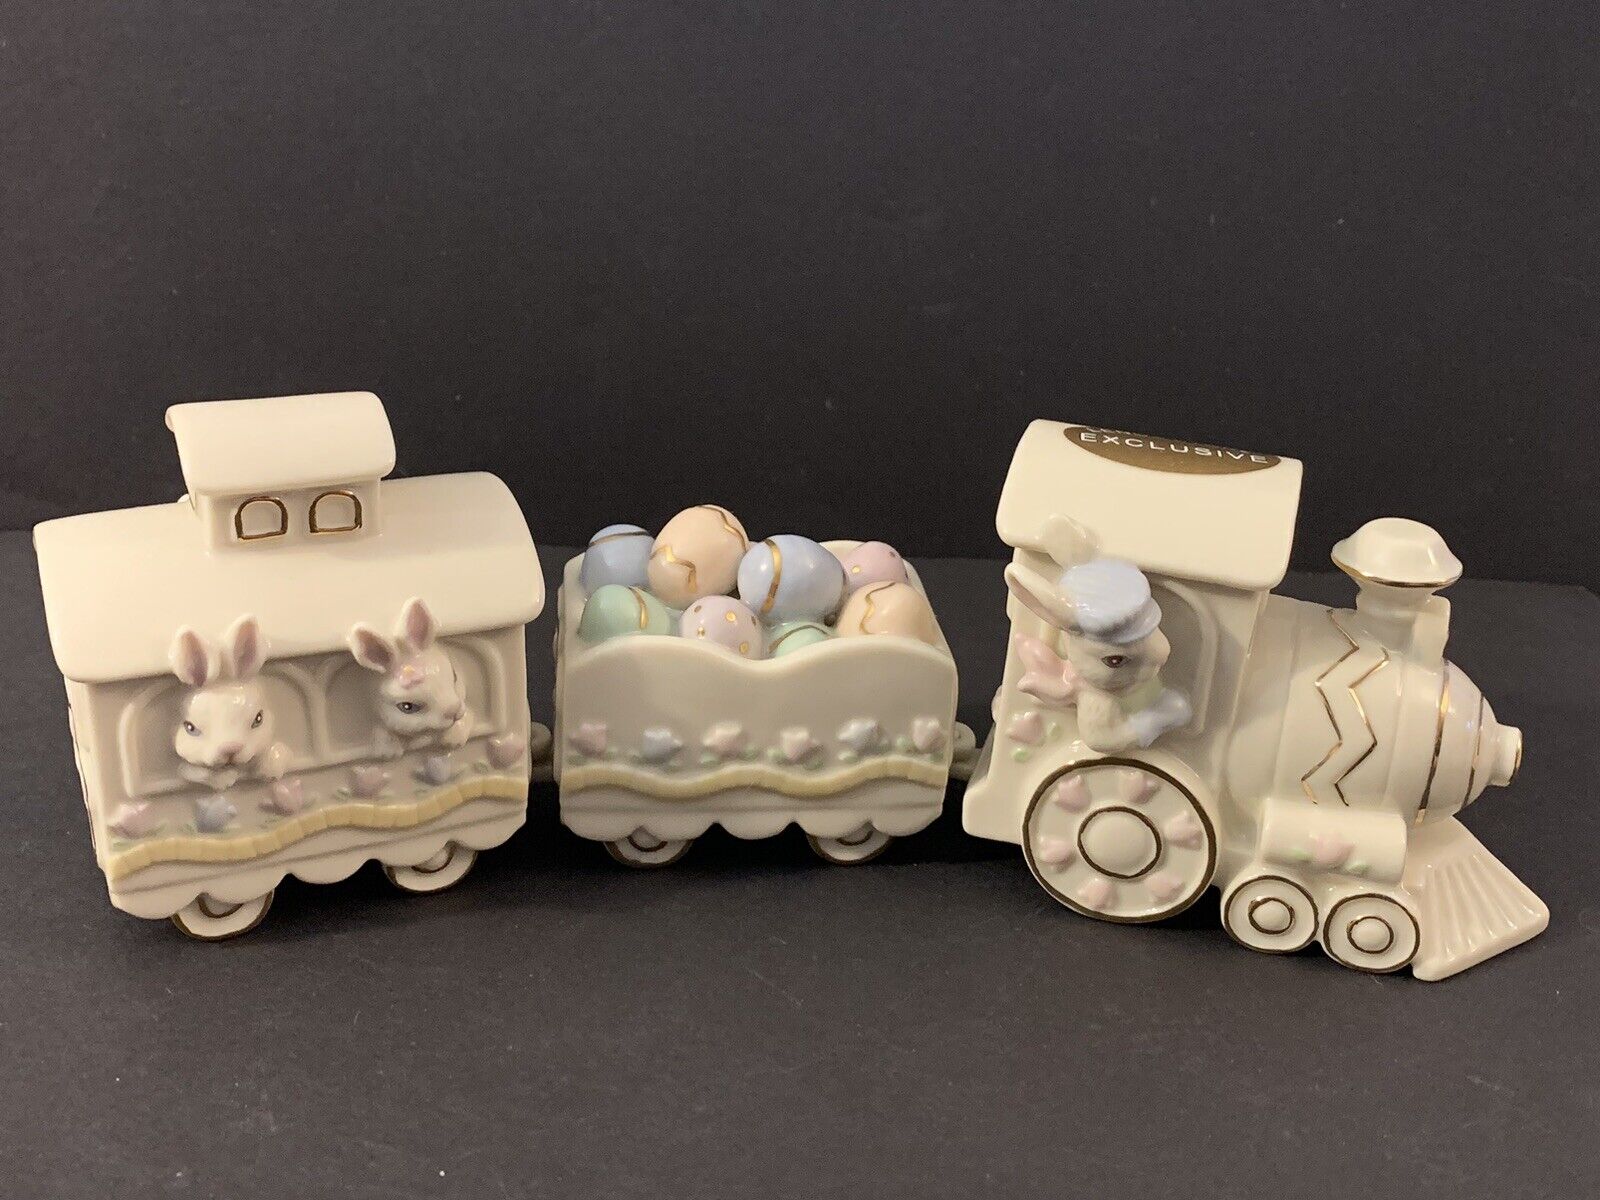 Lenox Occasions Easter Train Set of 3 Figurines Bunnies Eggs 814175 Porcelain